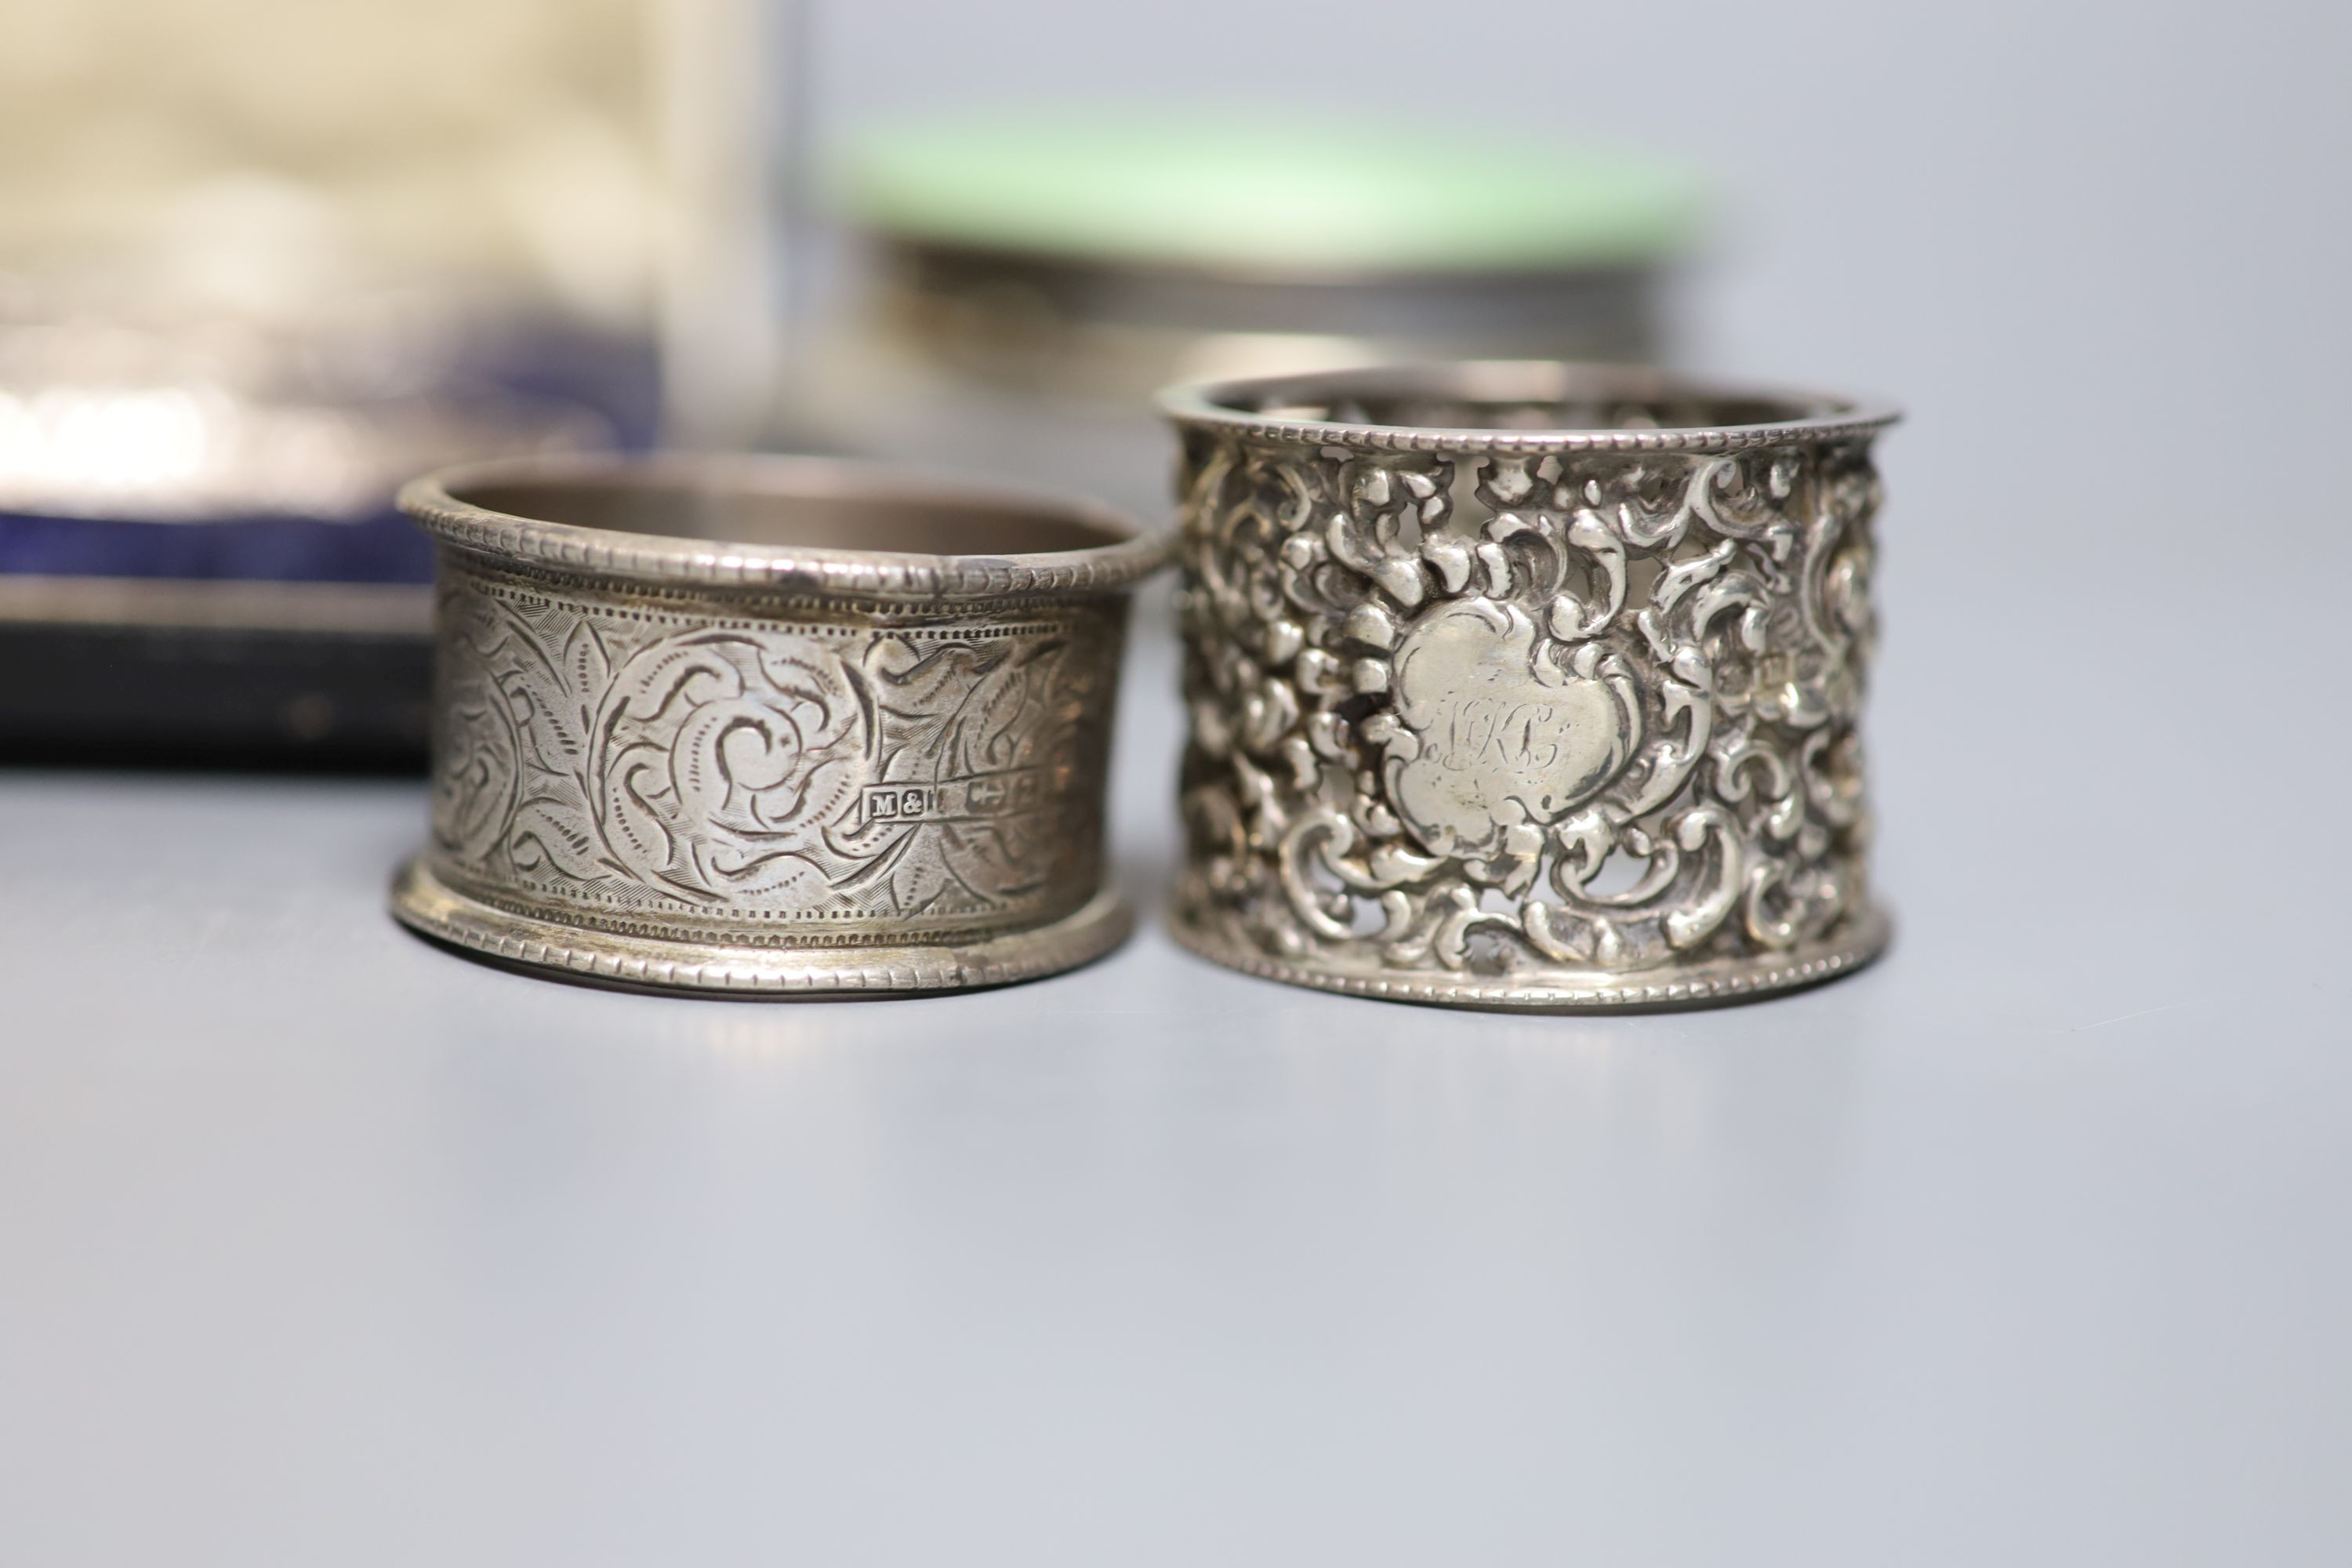 A glass silver mounted inkwell, 2 napkin rings boxed silver dishes and an enamel box - Image 2 of 6